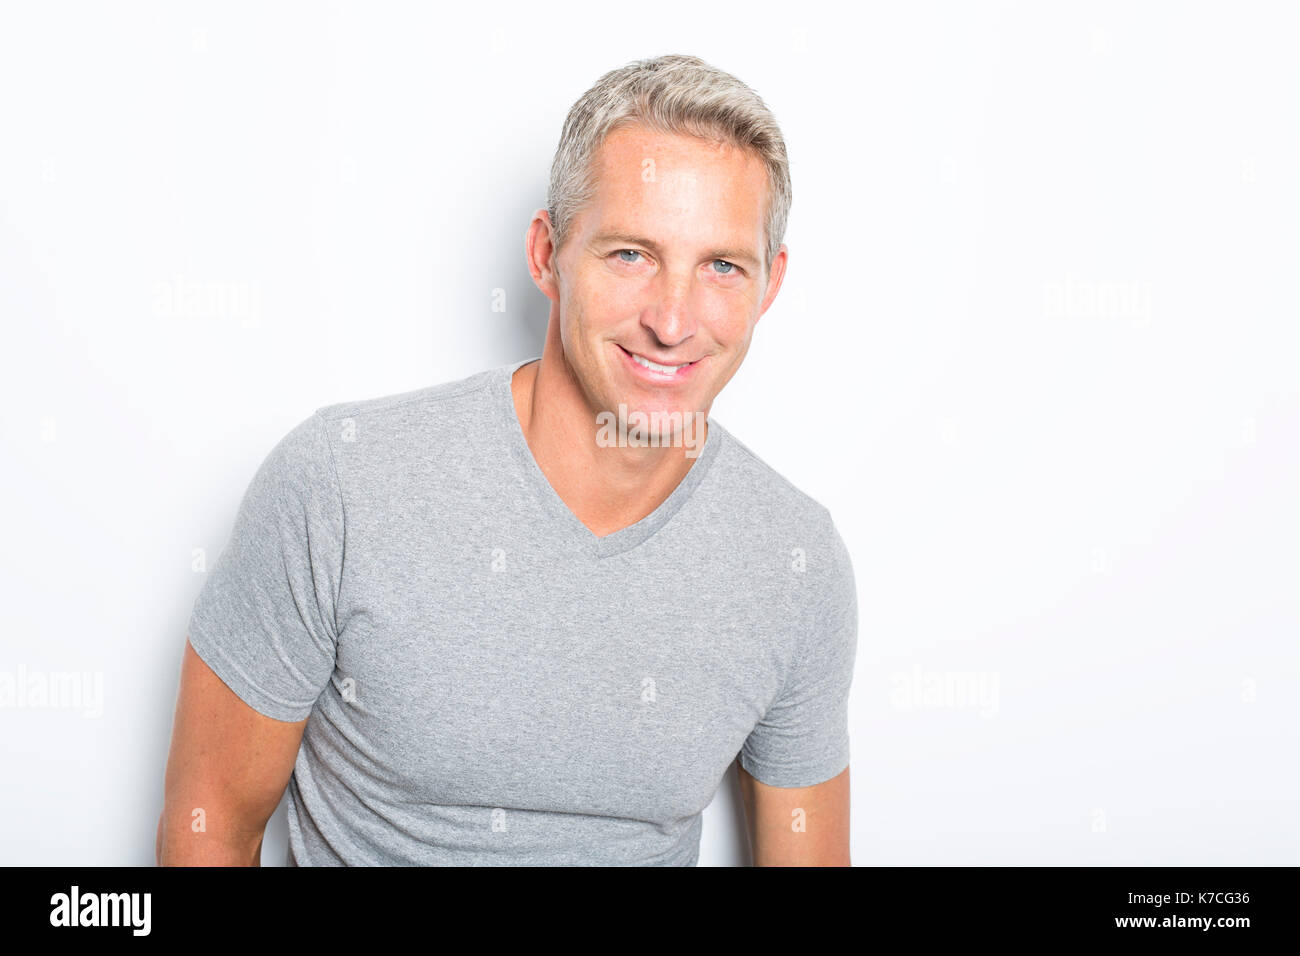 Portrait of young man standing on white background Banque D'Images